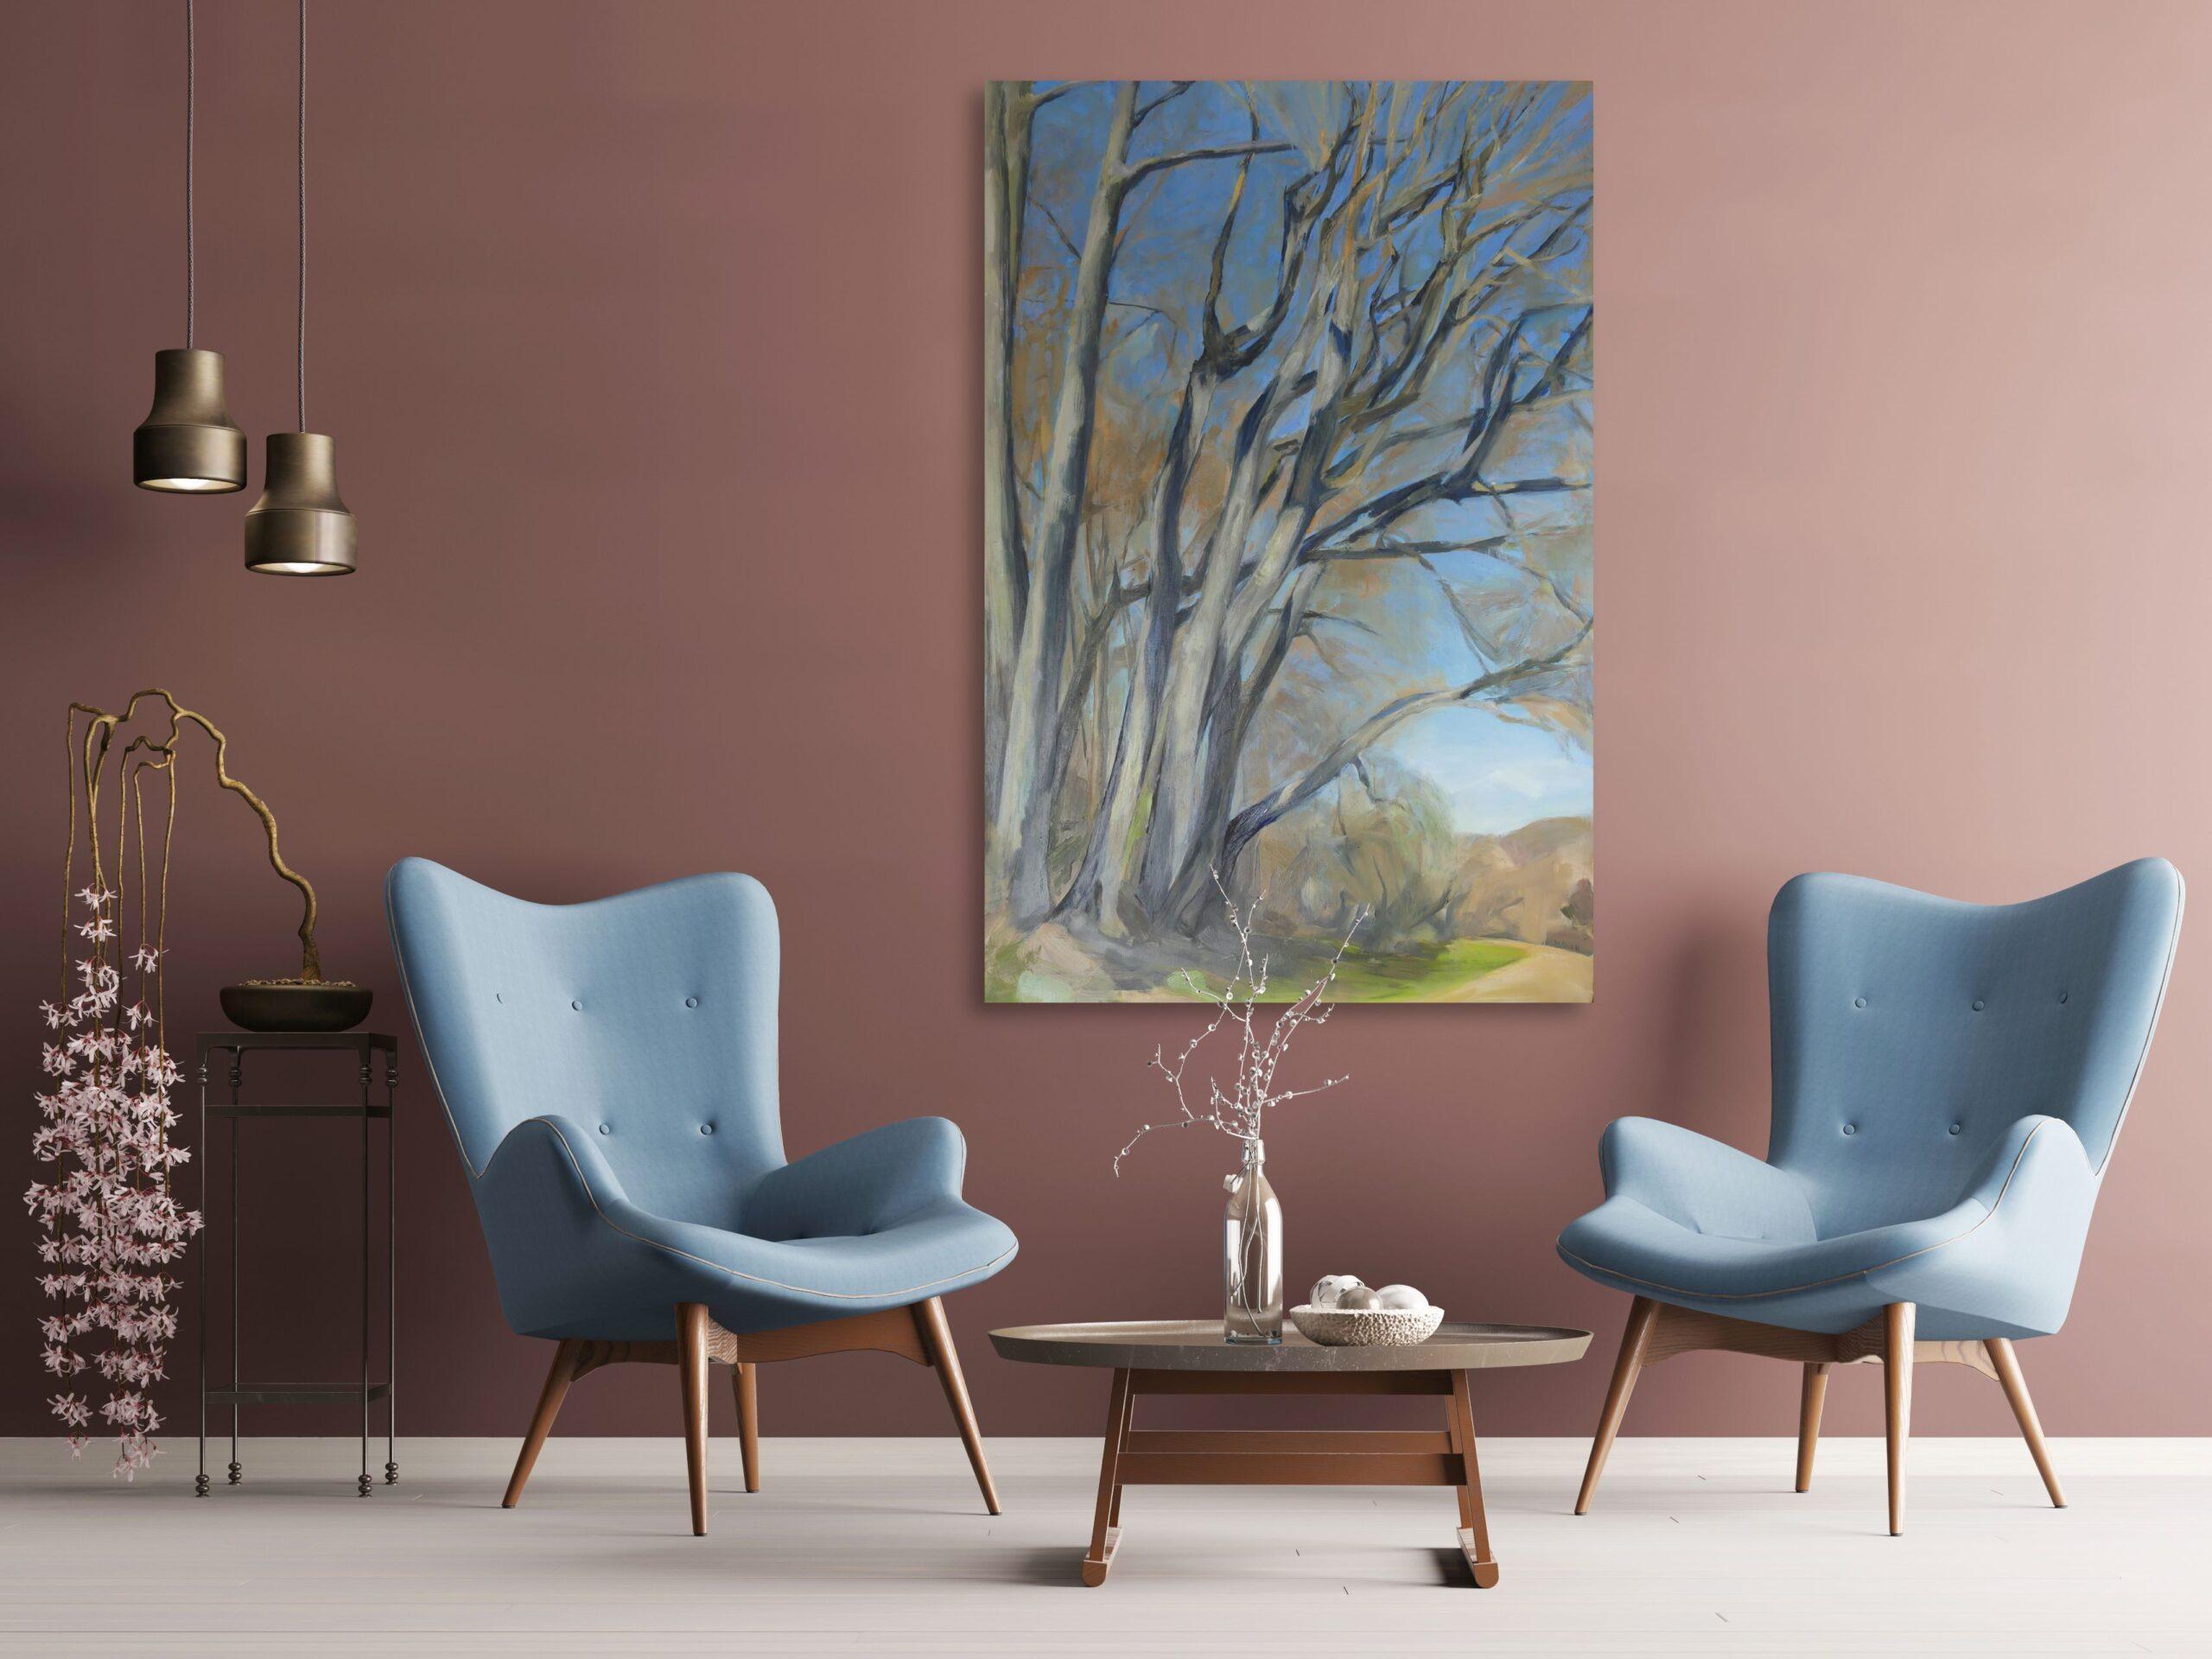 Bouquet of trees is a unique oil on canvas painting by contemporary artist Valérie de Sarrieu, dimensions are 120 × 80 cm (47.2 × 31.5 in).
The artwork is signed, sold unframed and comes with a certificate of authenticity. 

Valérie de Sarrieu